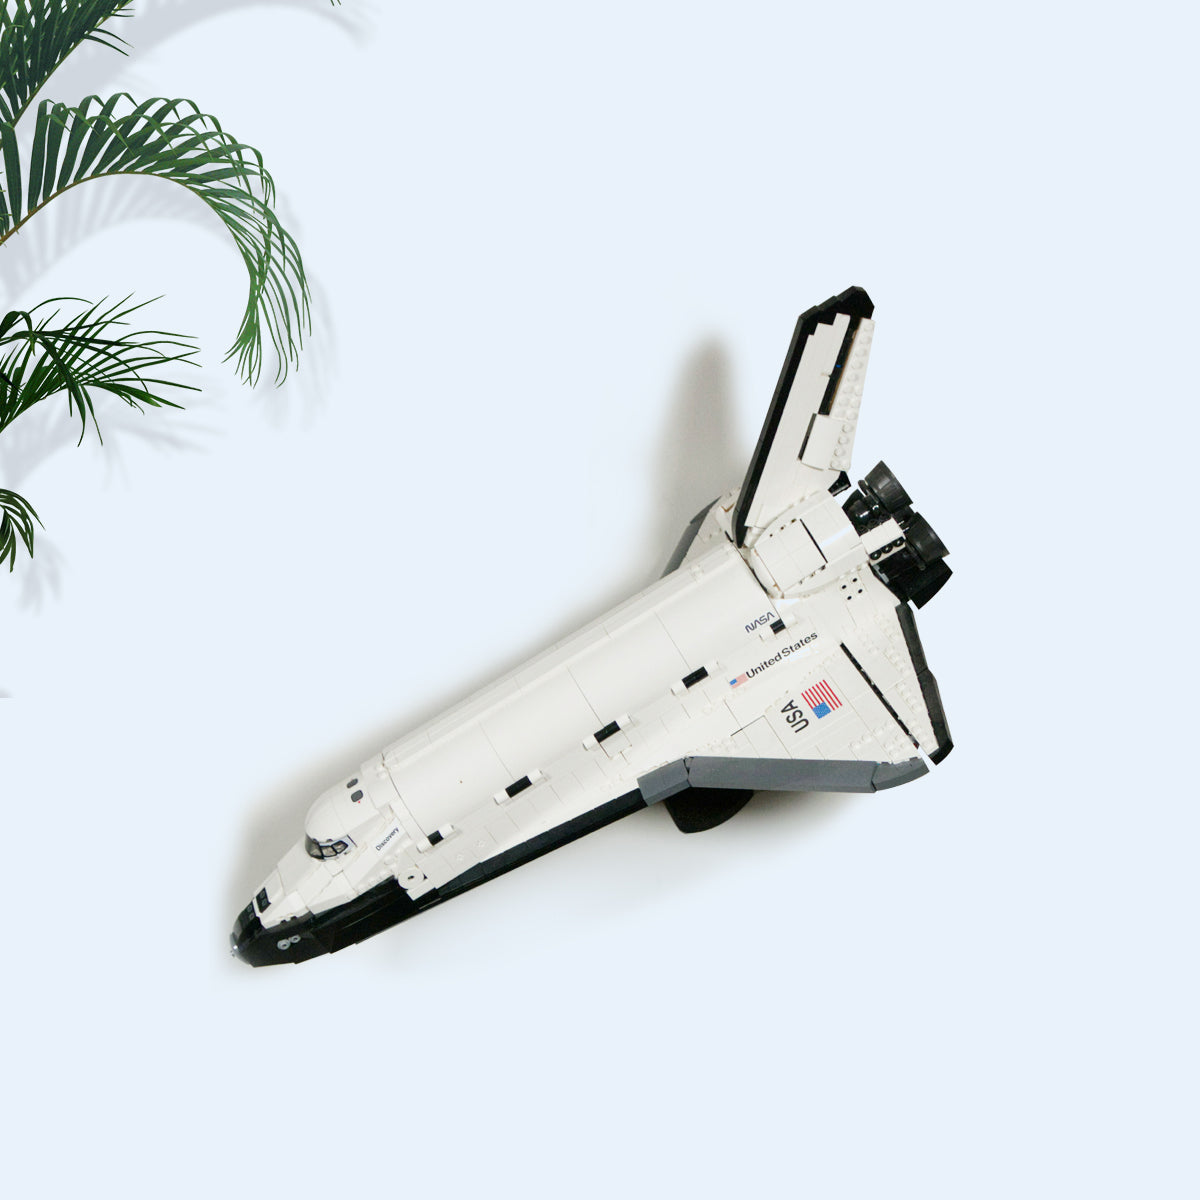 3D Printed Wall Mount for LEGO SPACE SHUTTLE DISCOVERY 10283